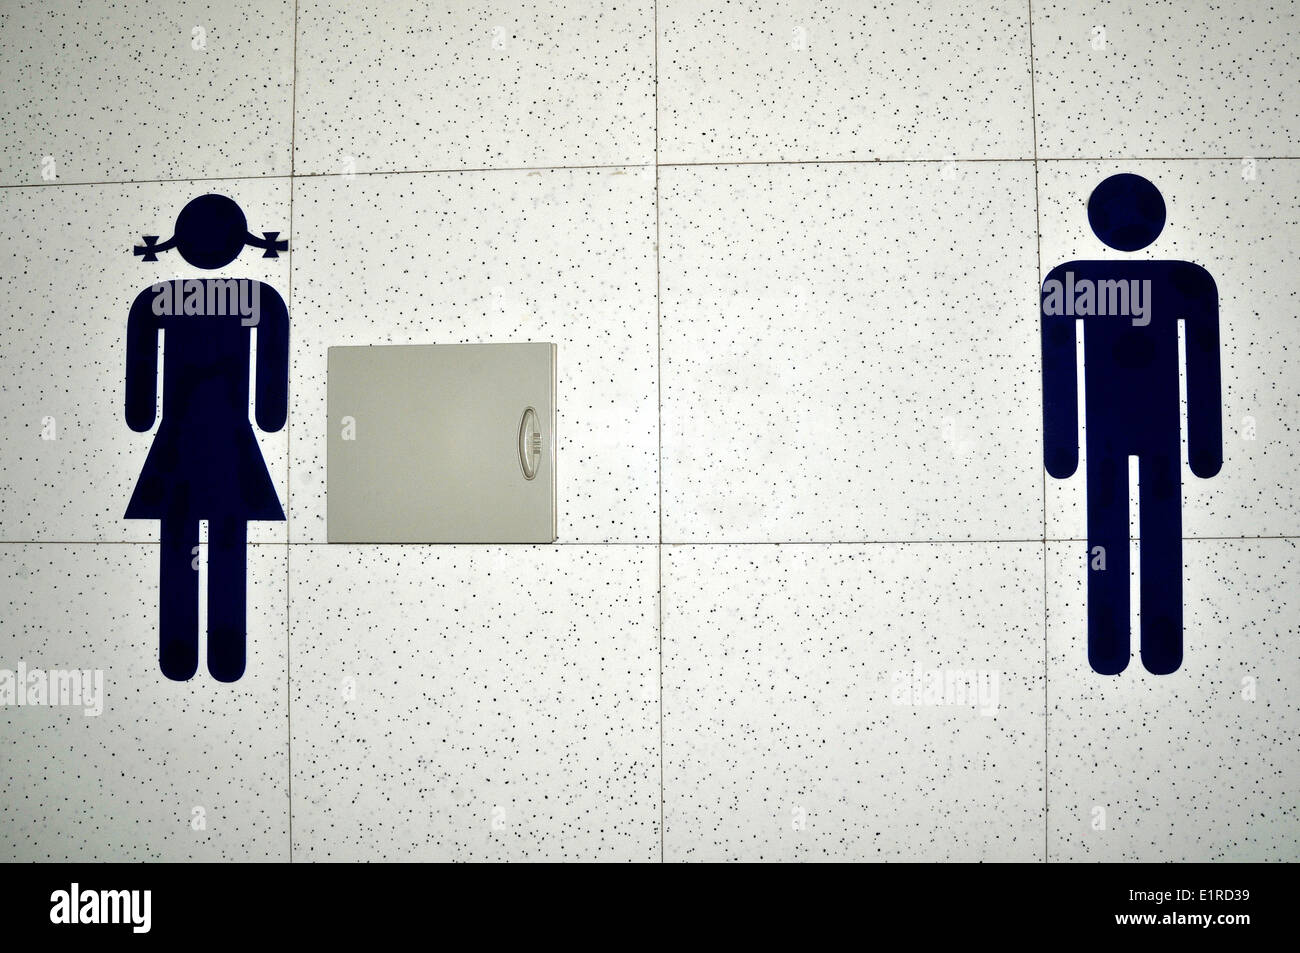 toilet sign on wall Stock Photo